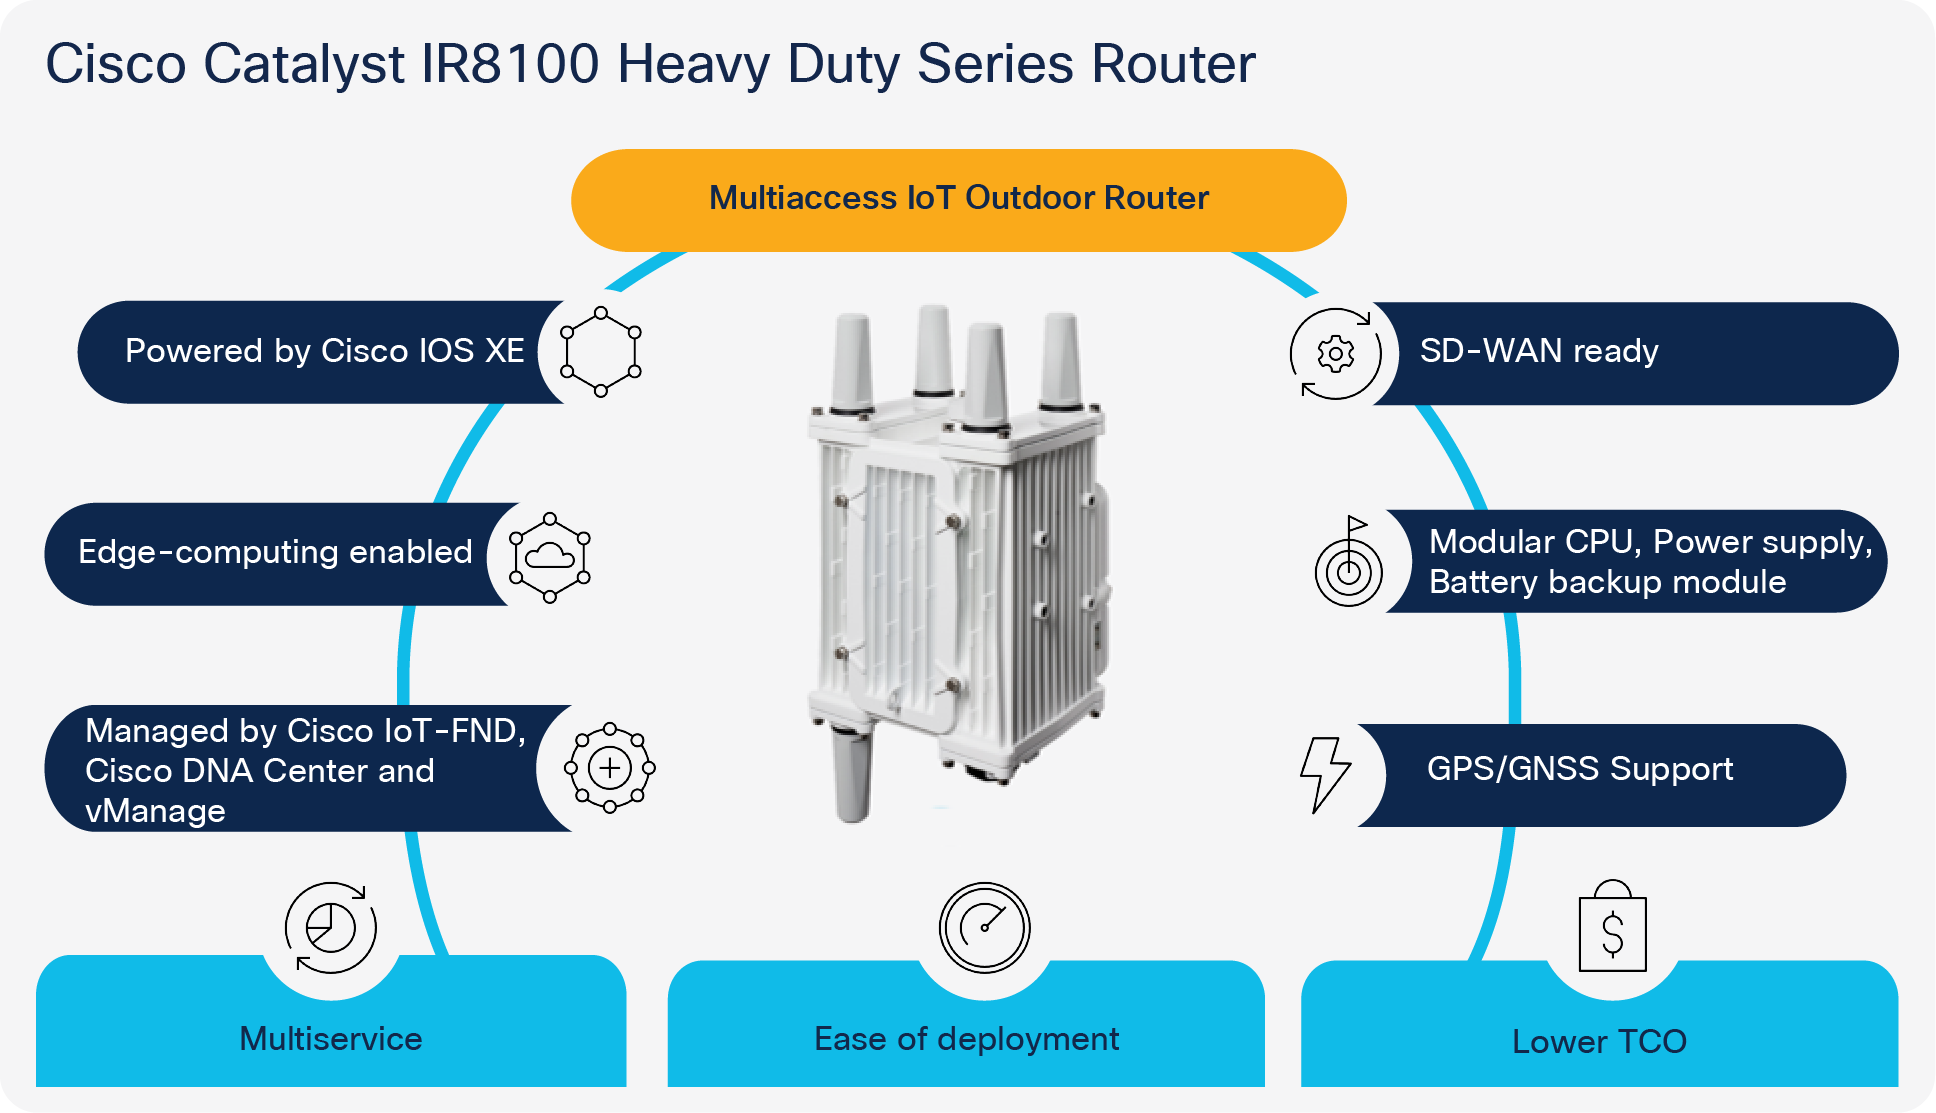 Overview of the Catalyst IR8100 Heavy Duty Series